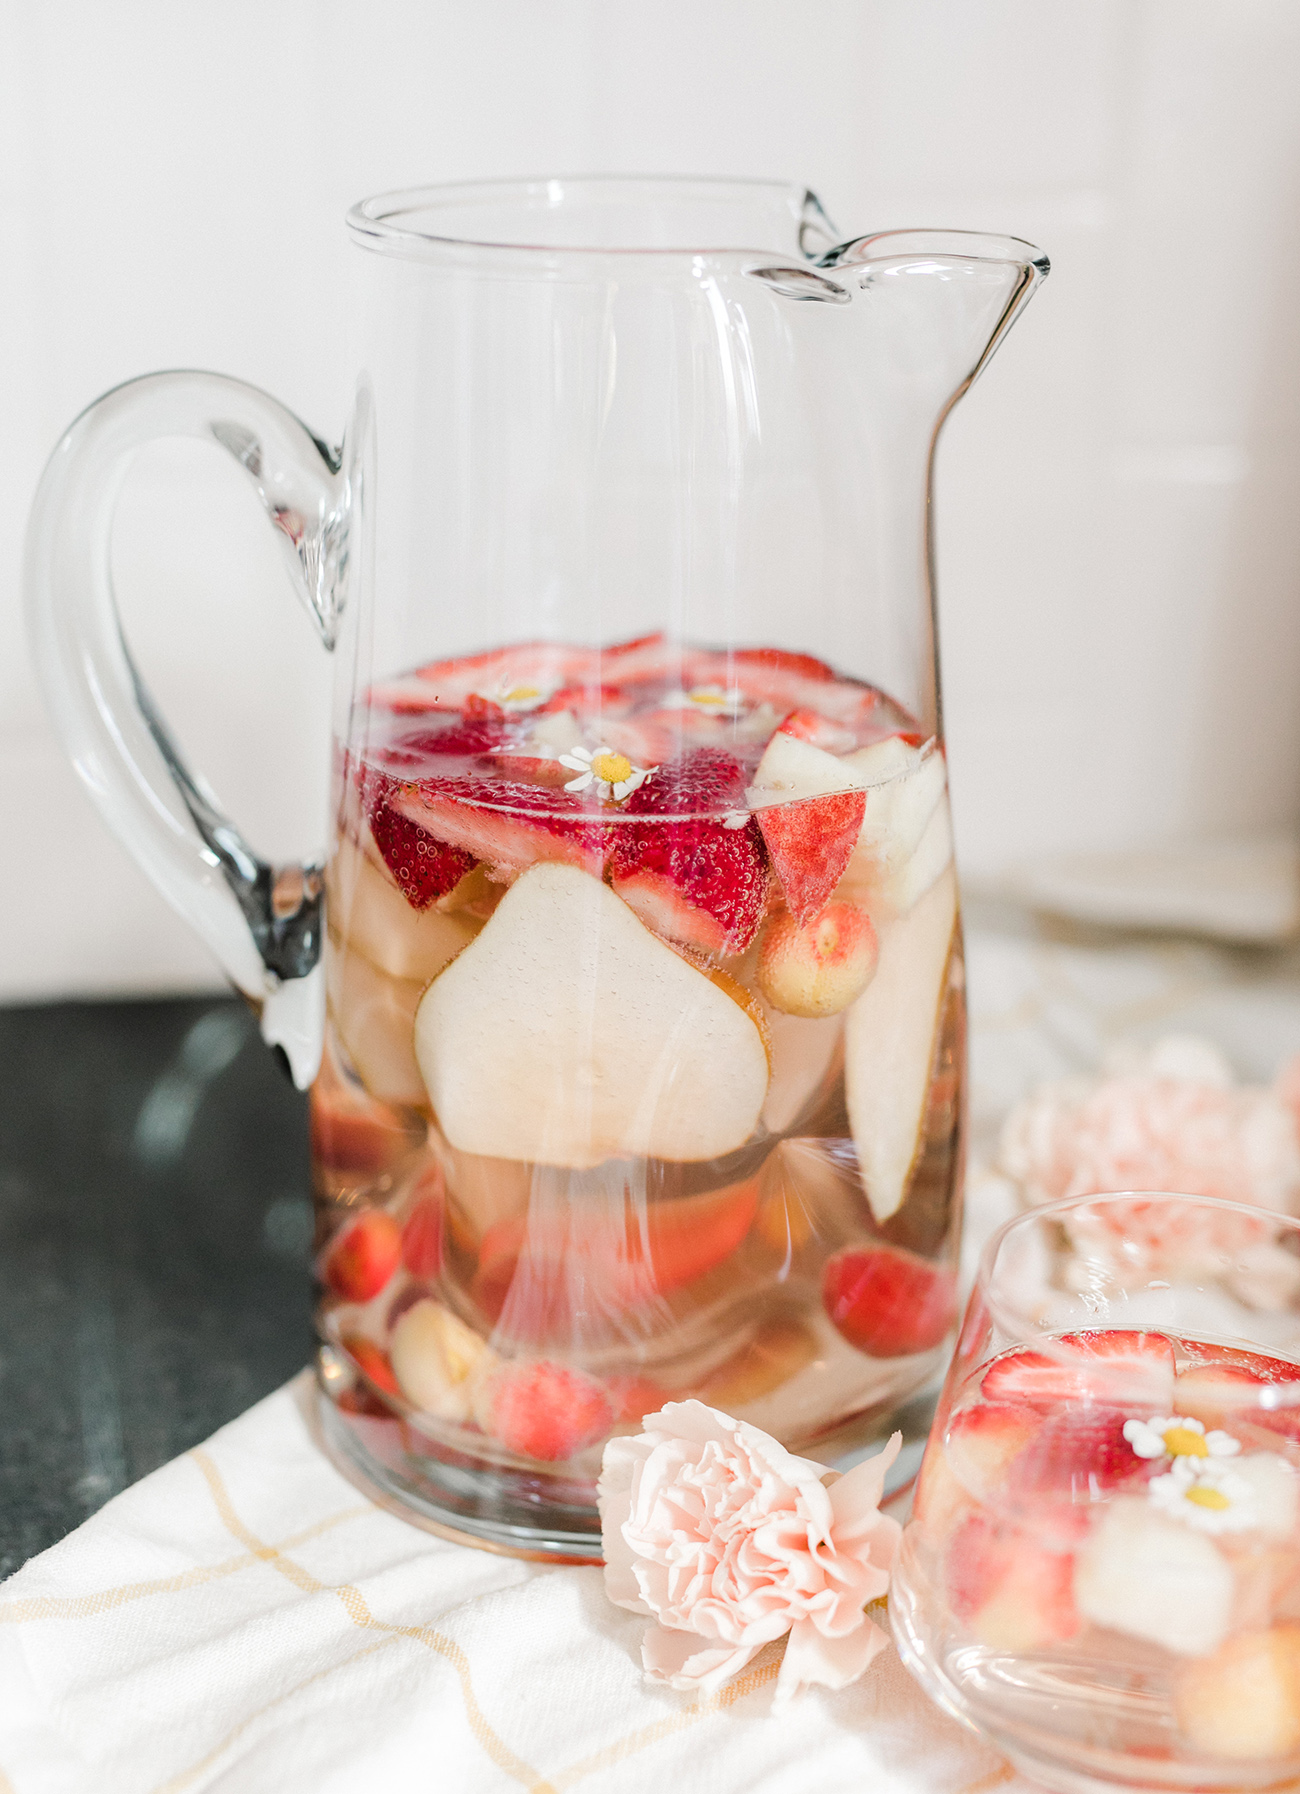 Rosé Sangria with Cherries, Pears and Strawberries